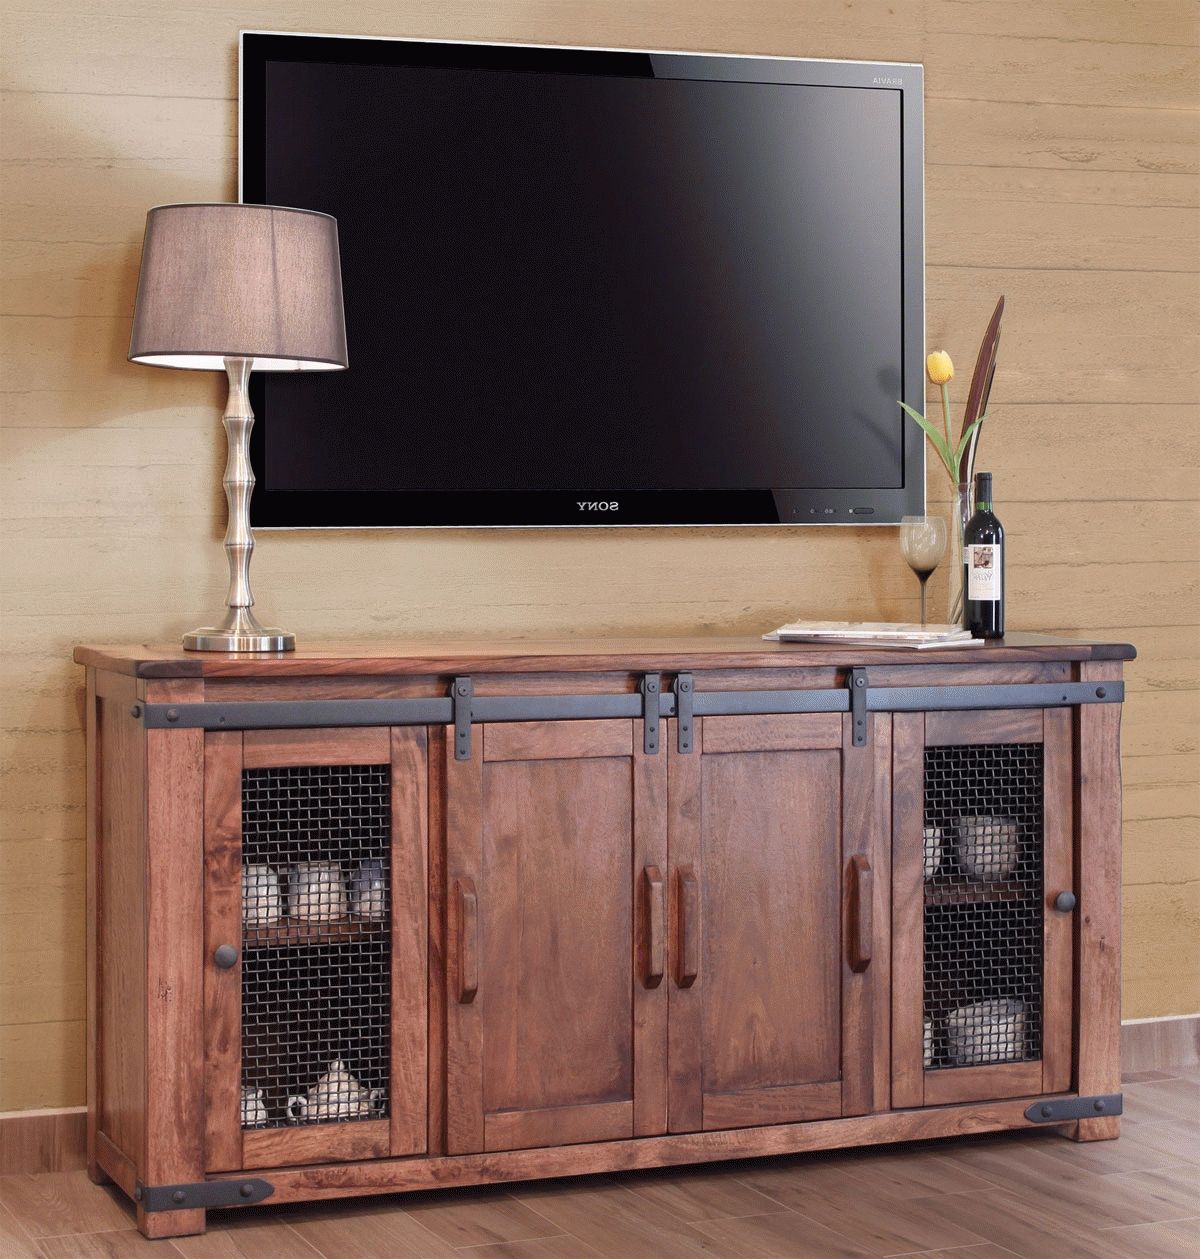 Barn Door Tv Stand, Rustic Barn Door Tv Stand, Rustic Tv Stand Throughout Wooden Tv Stands With Doors (View 8 of 15)